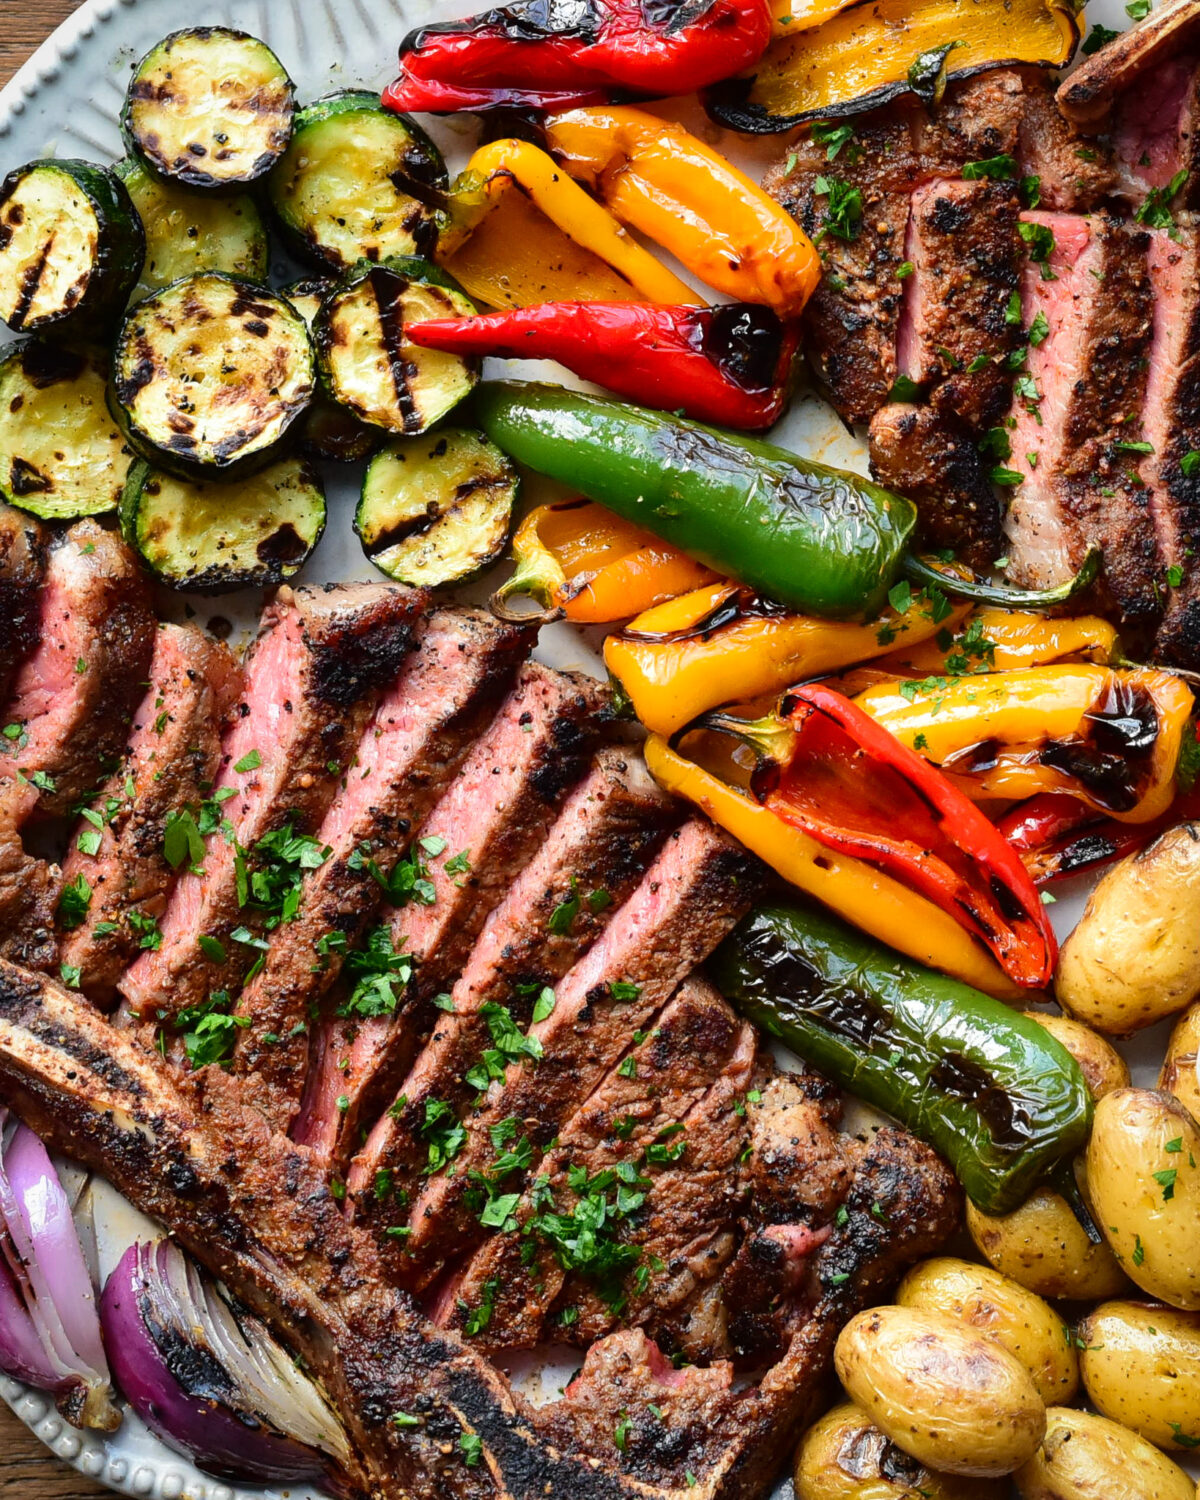 A platter of grilled veggies with sliced steak.